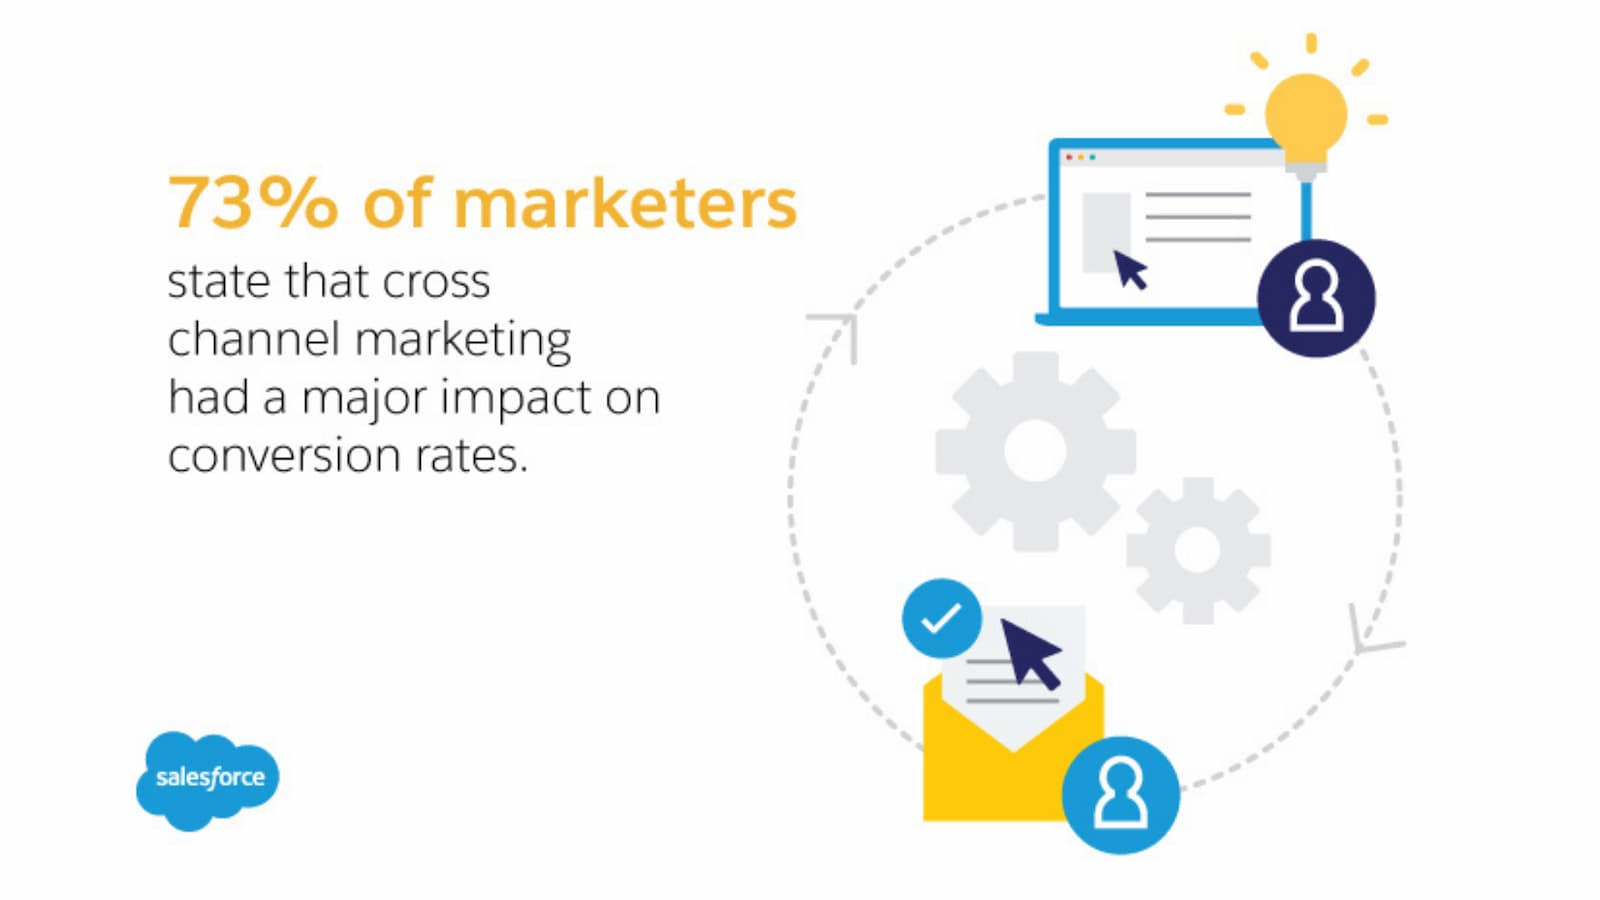 Marketers Impact